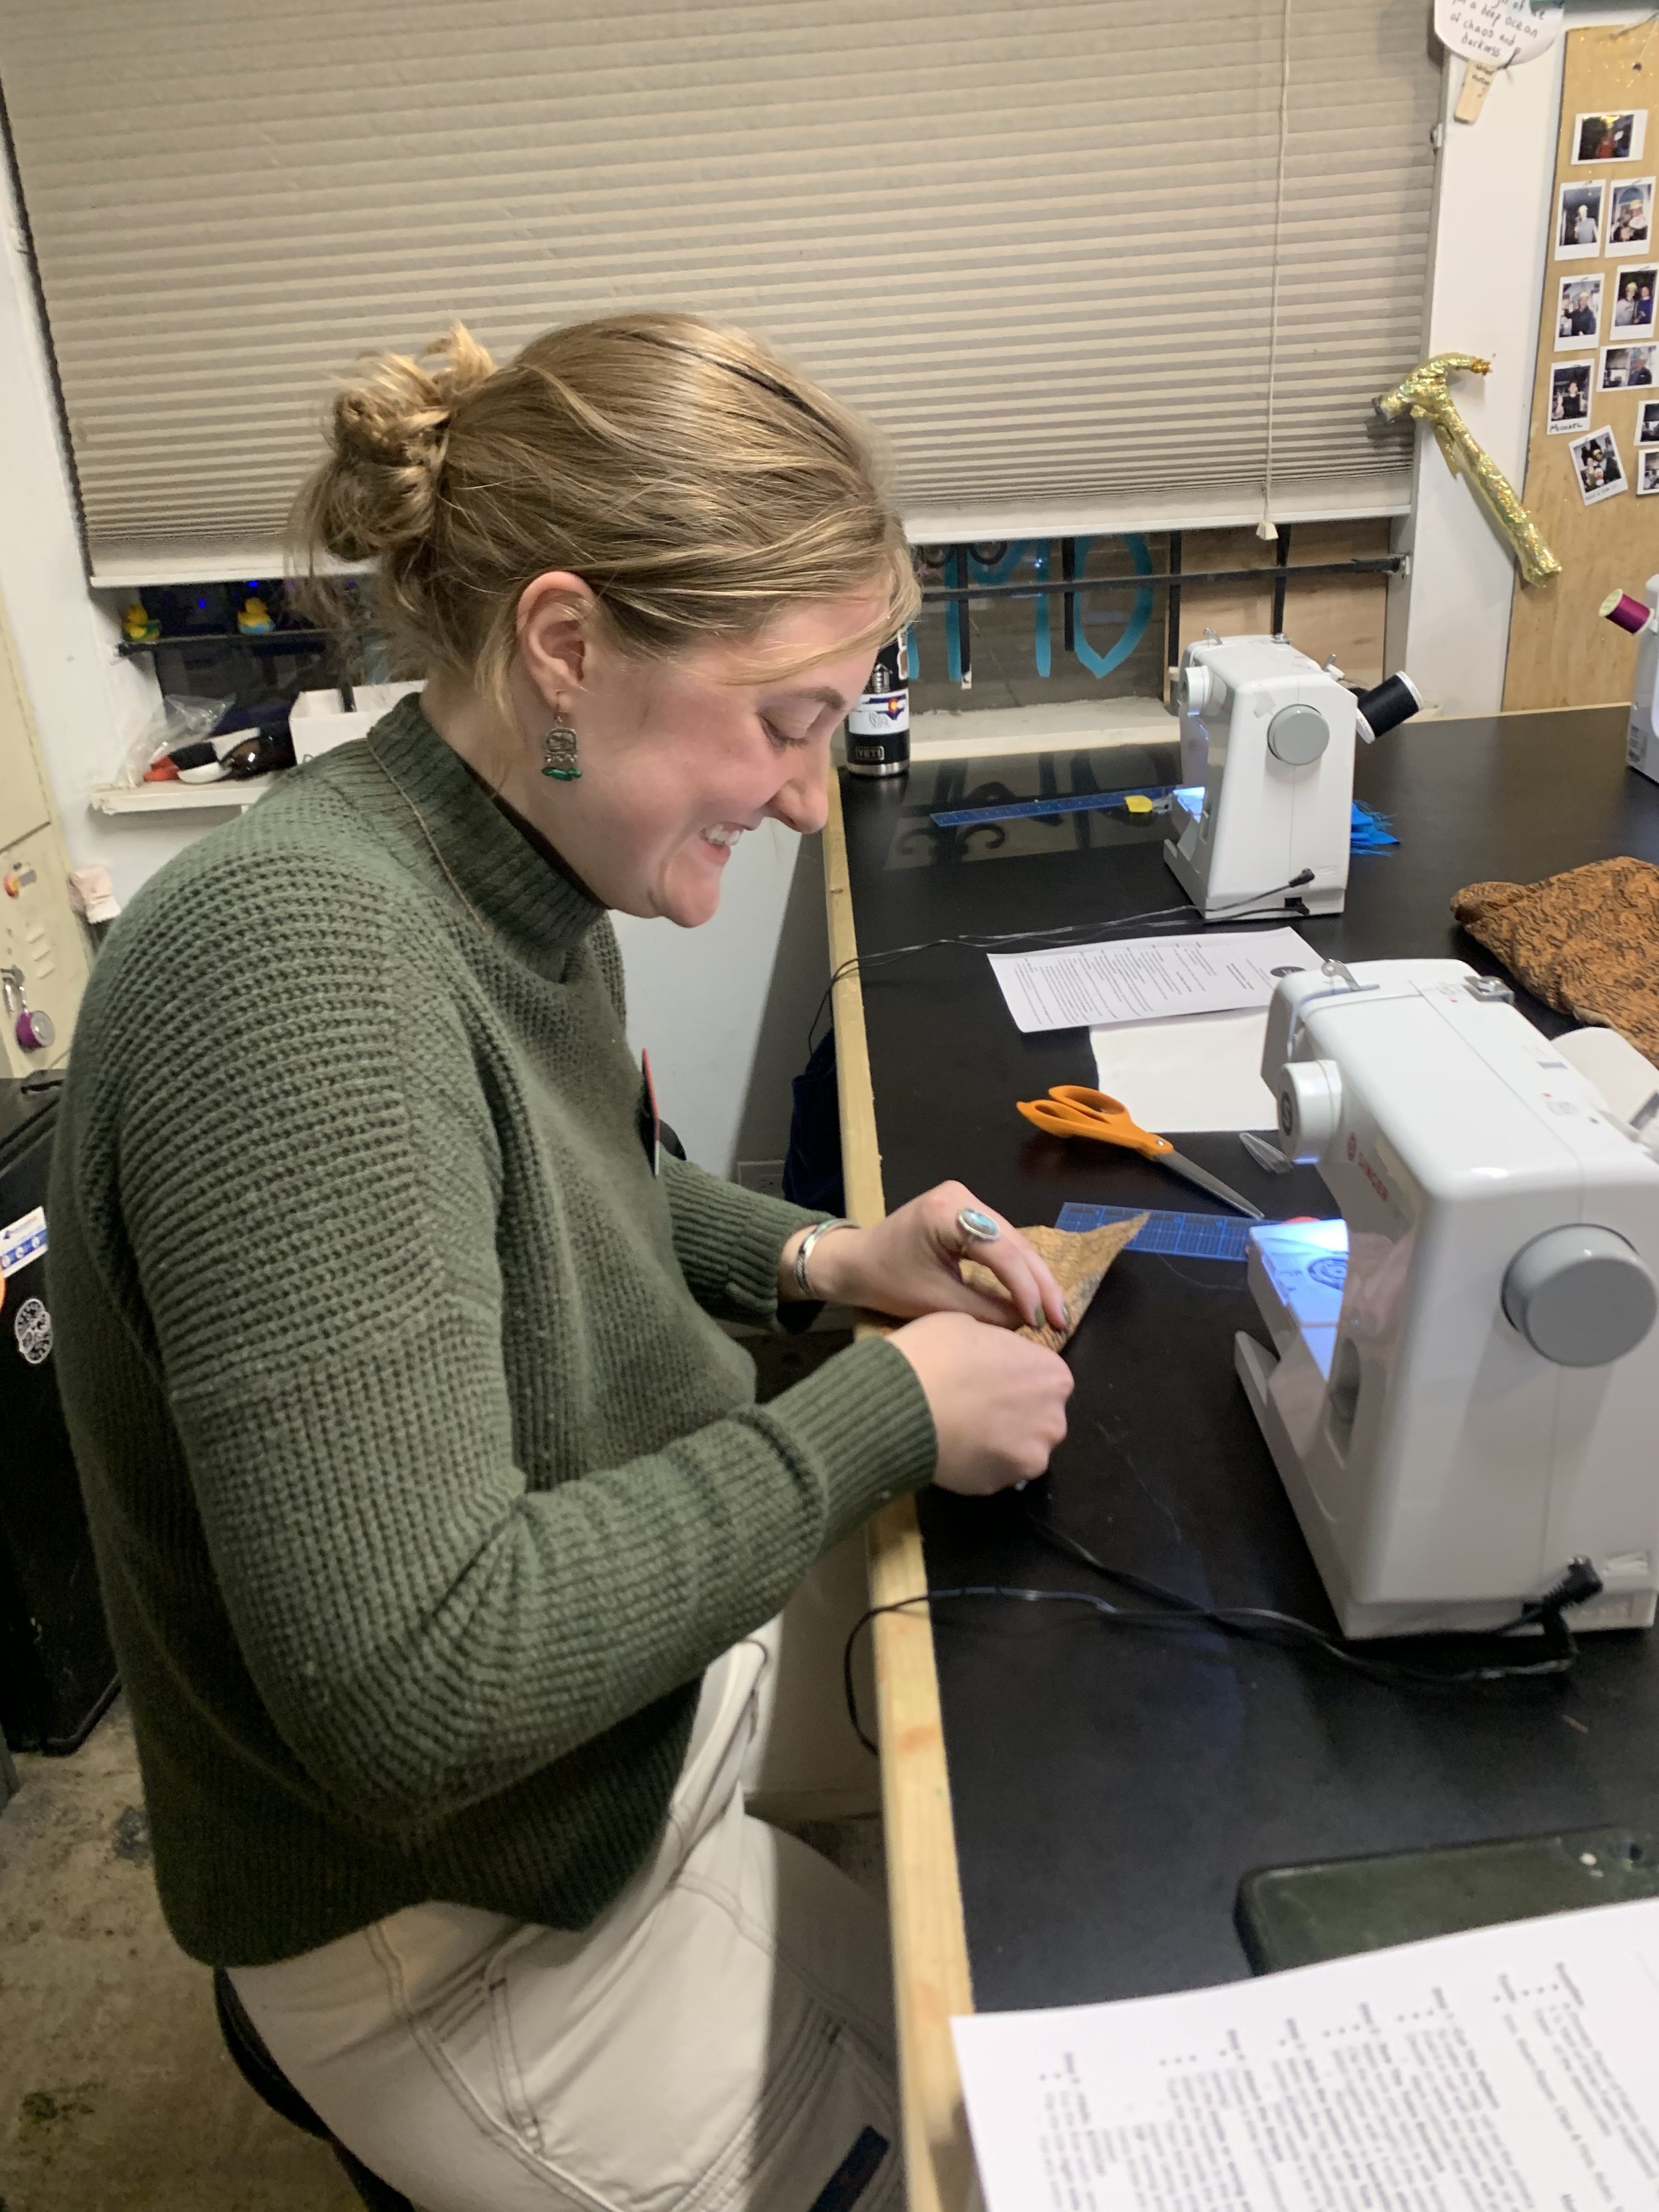 Sewing I: Sewing Machine Basics Class — Denver Tool Library